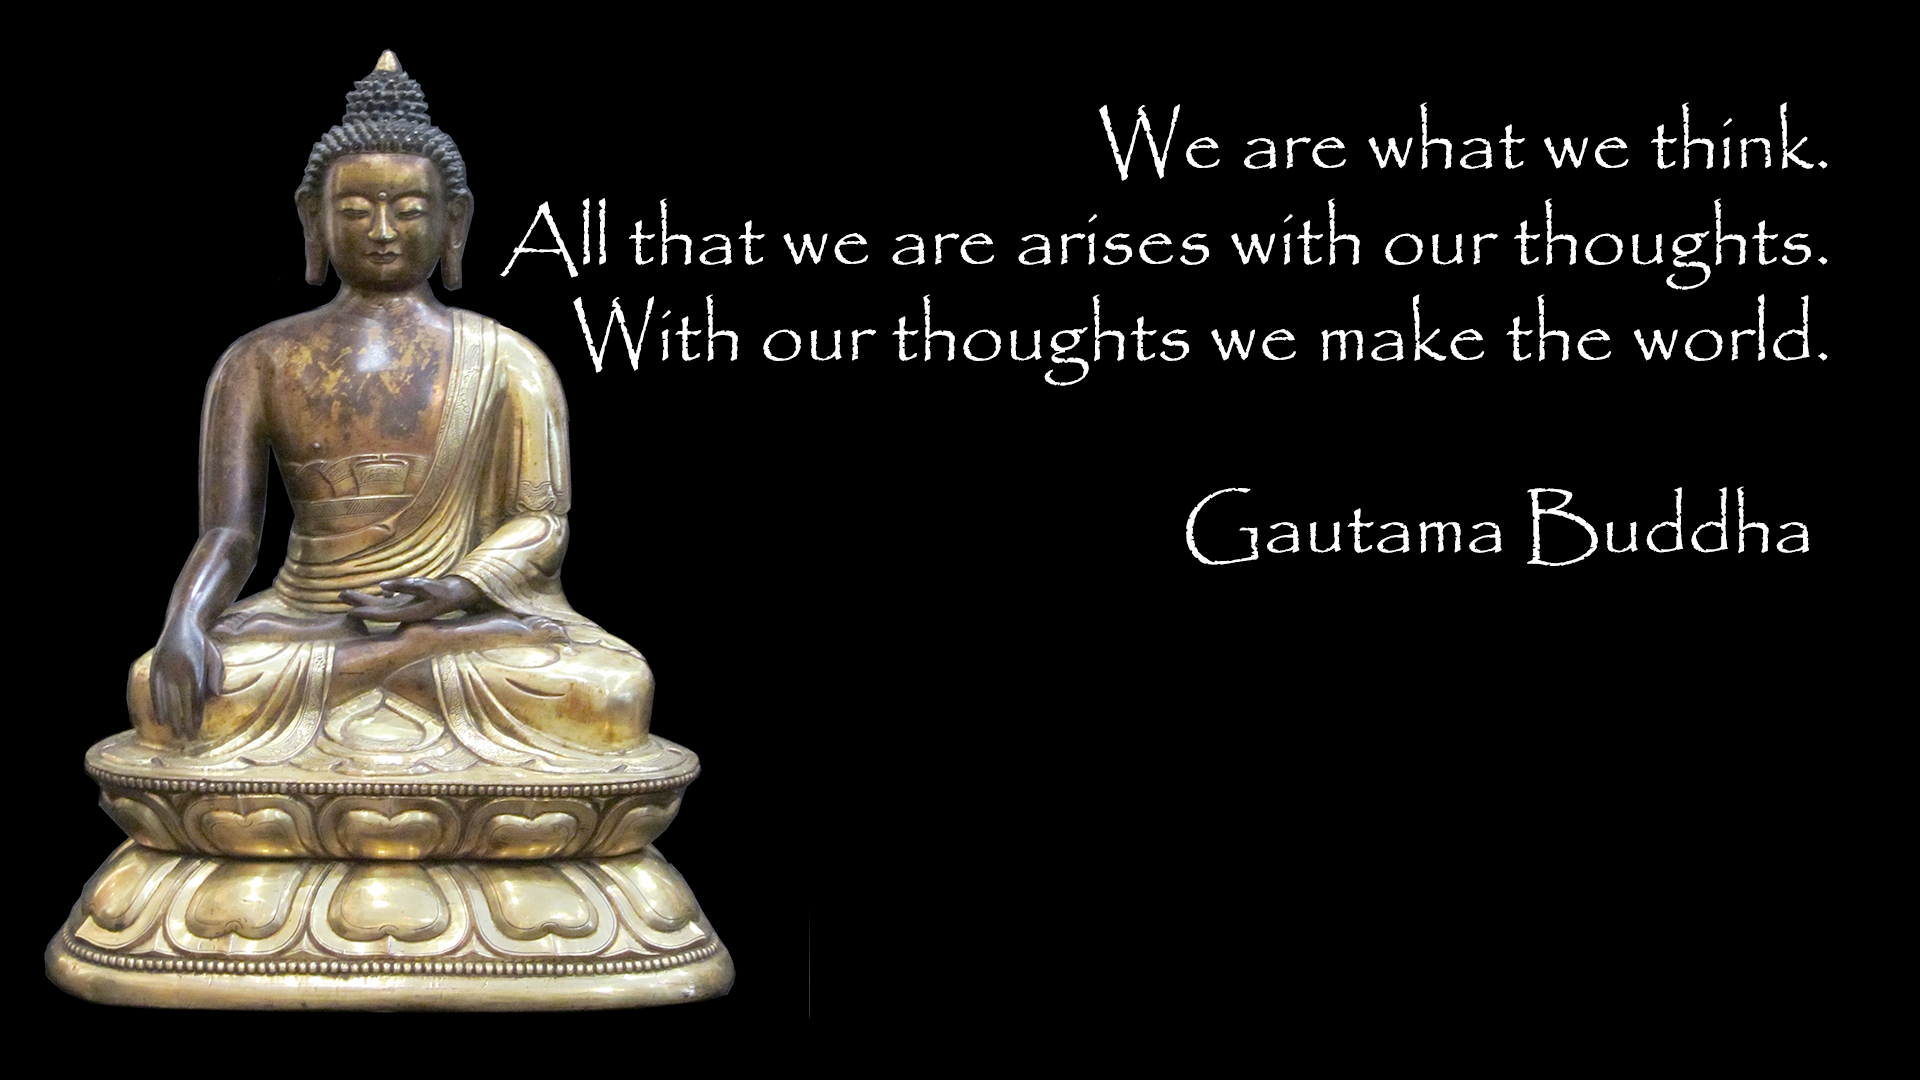 We are what we think. Al, that we are arises with our thoughts. With our thoughts we make the world buddhist quotes